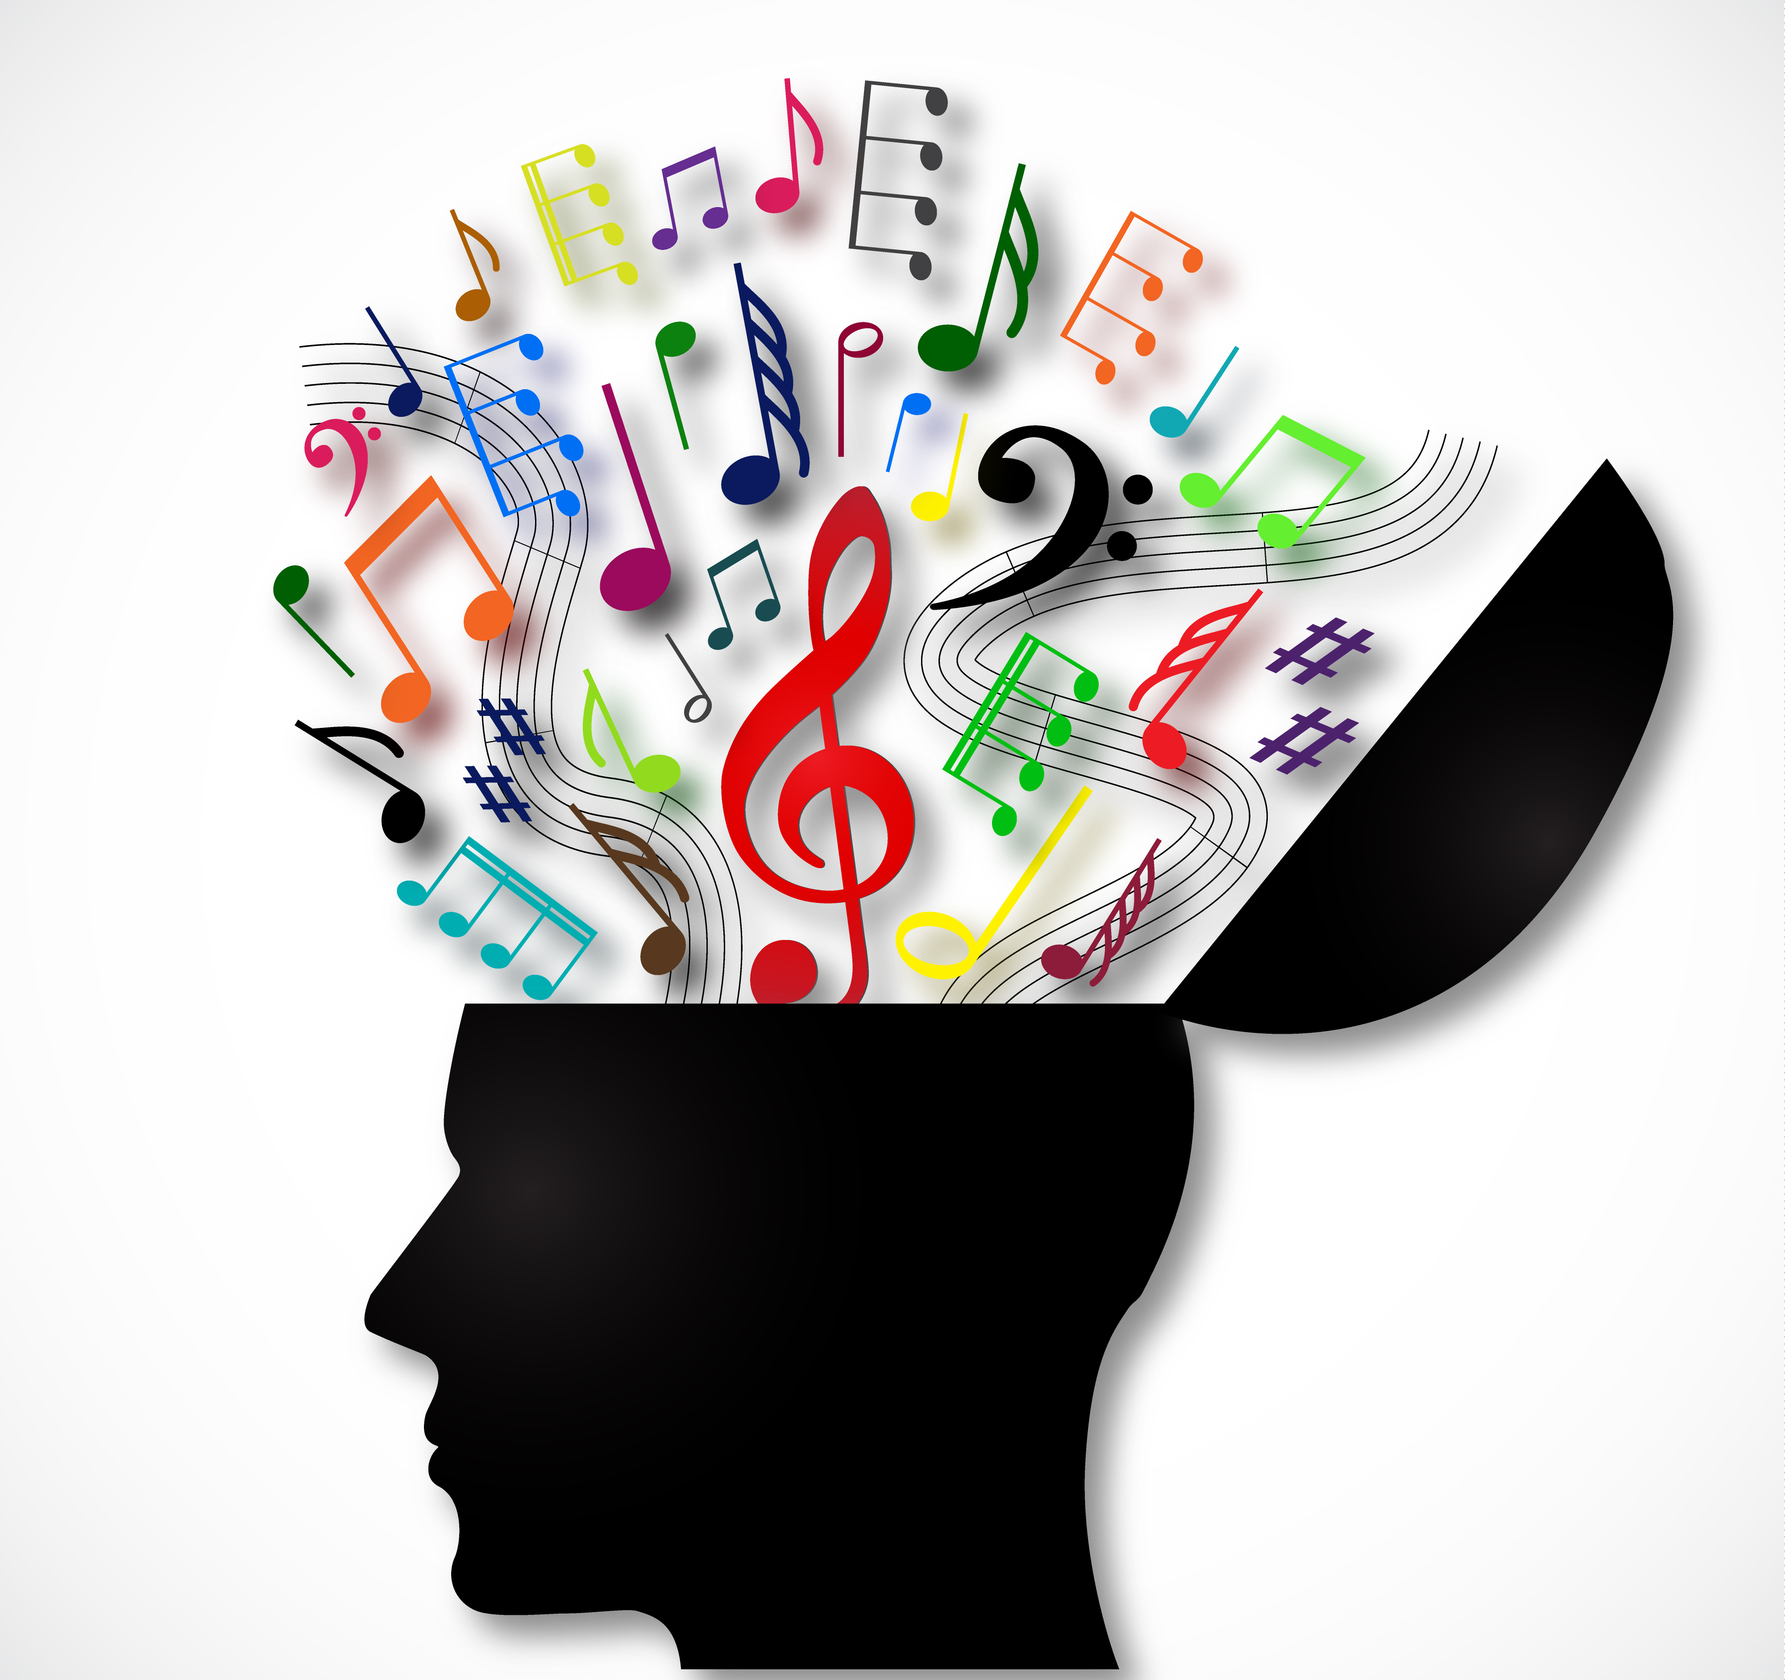 http://www.dreamstime.com/stock-images-human-head-open-color-music-symbols-illustration-silhouette-image33644994